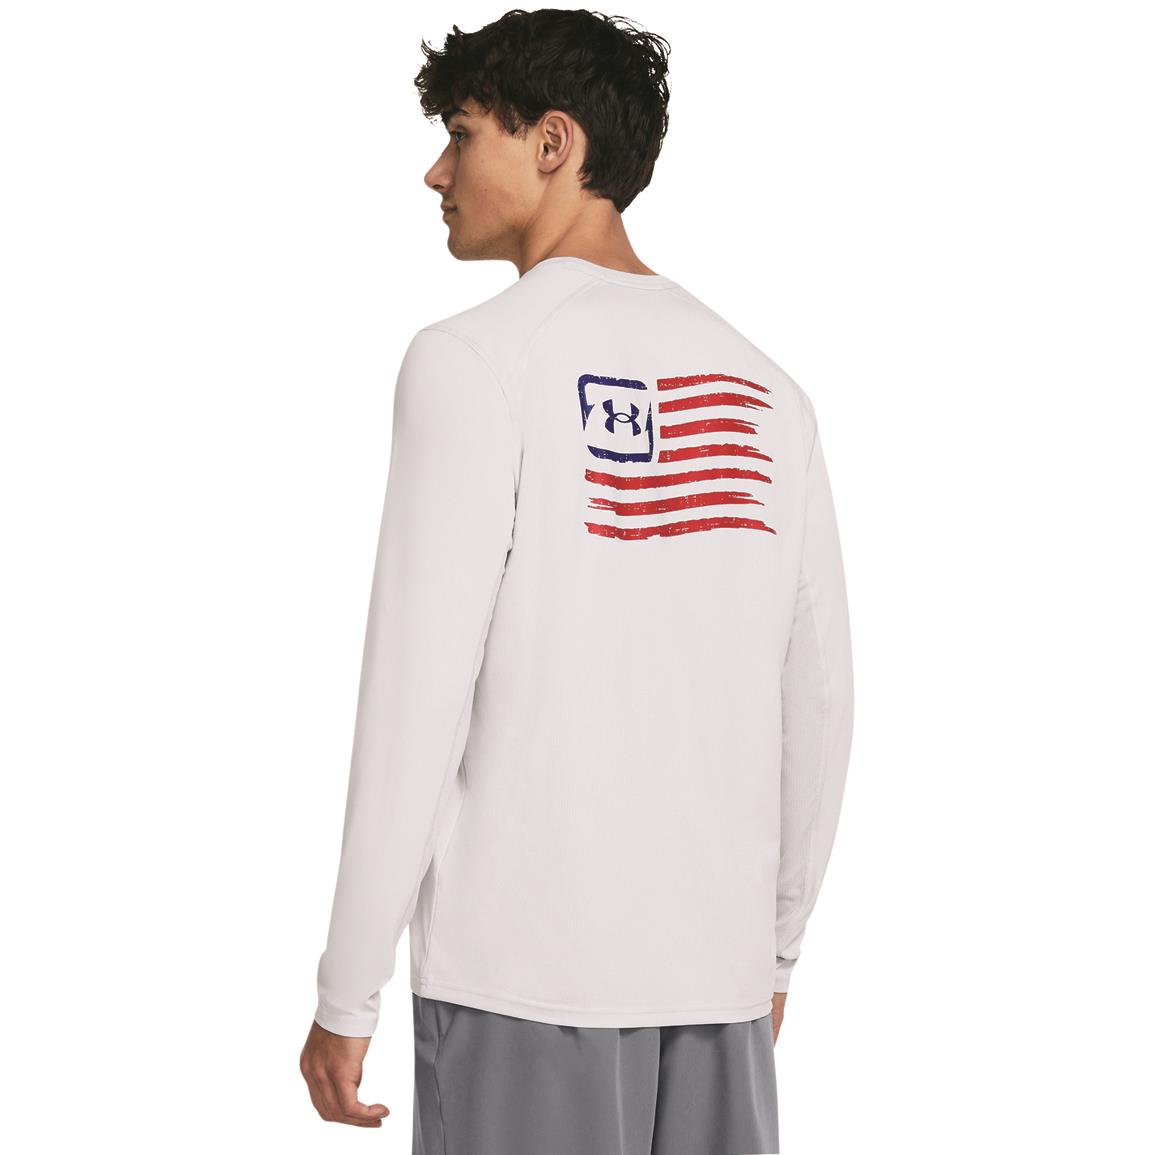 Under Armour Iso-Chill Freedom Long Sleeve Tee, Halo Gray/red/royal